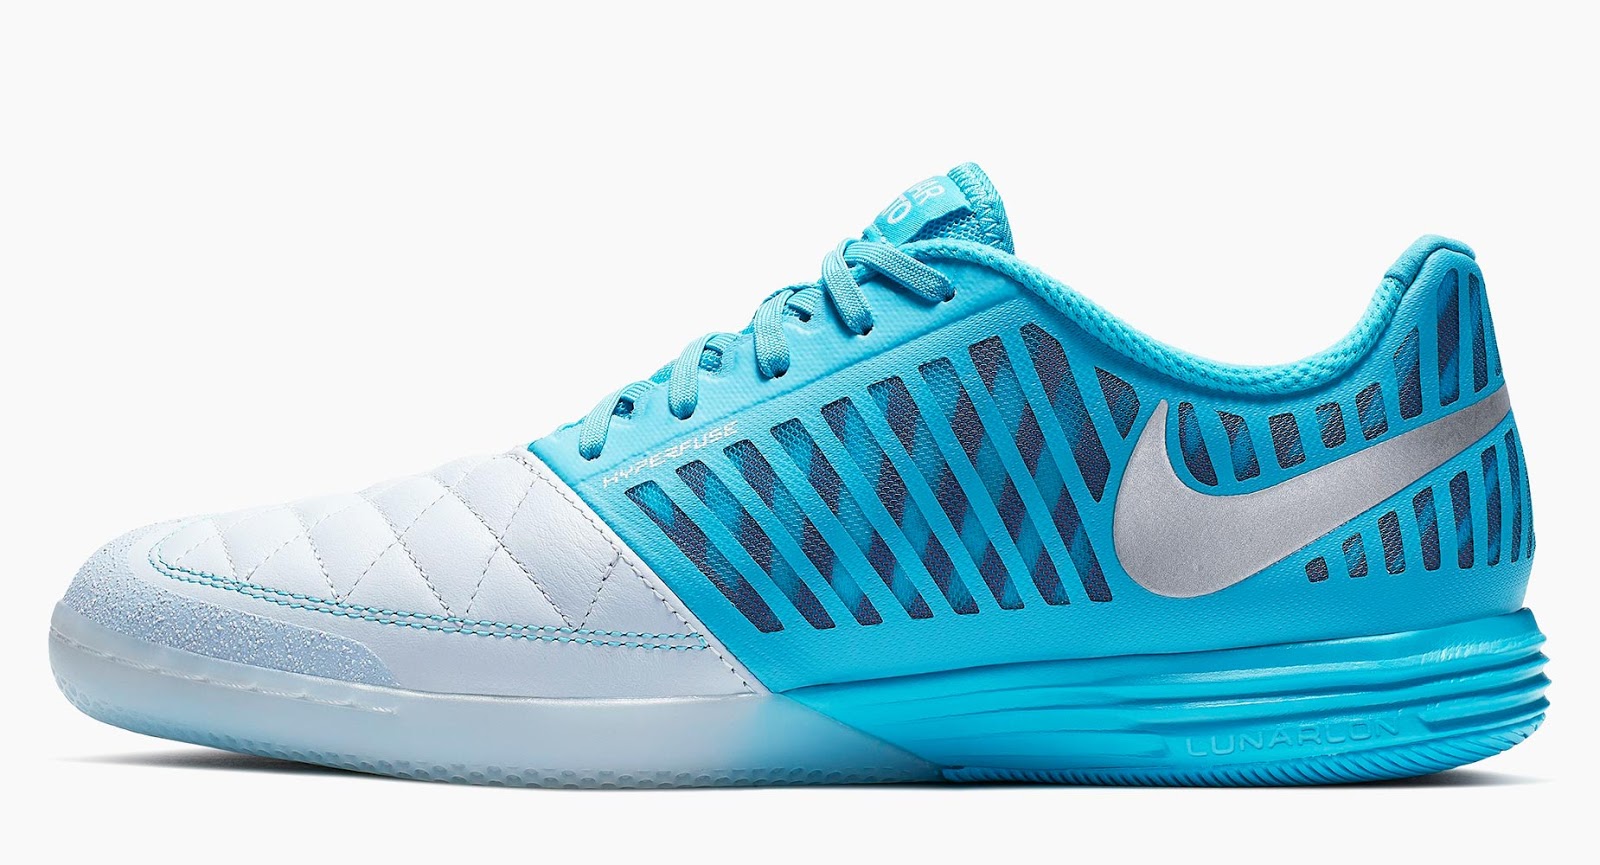 Four Years: Turquoise Nike Lunar Gato 2019 Boots Released - Footy